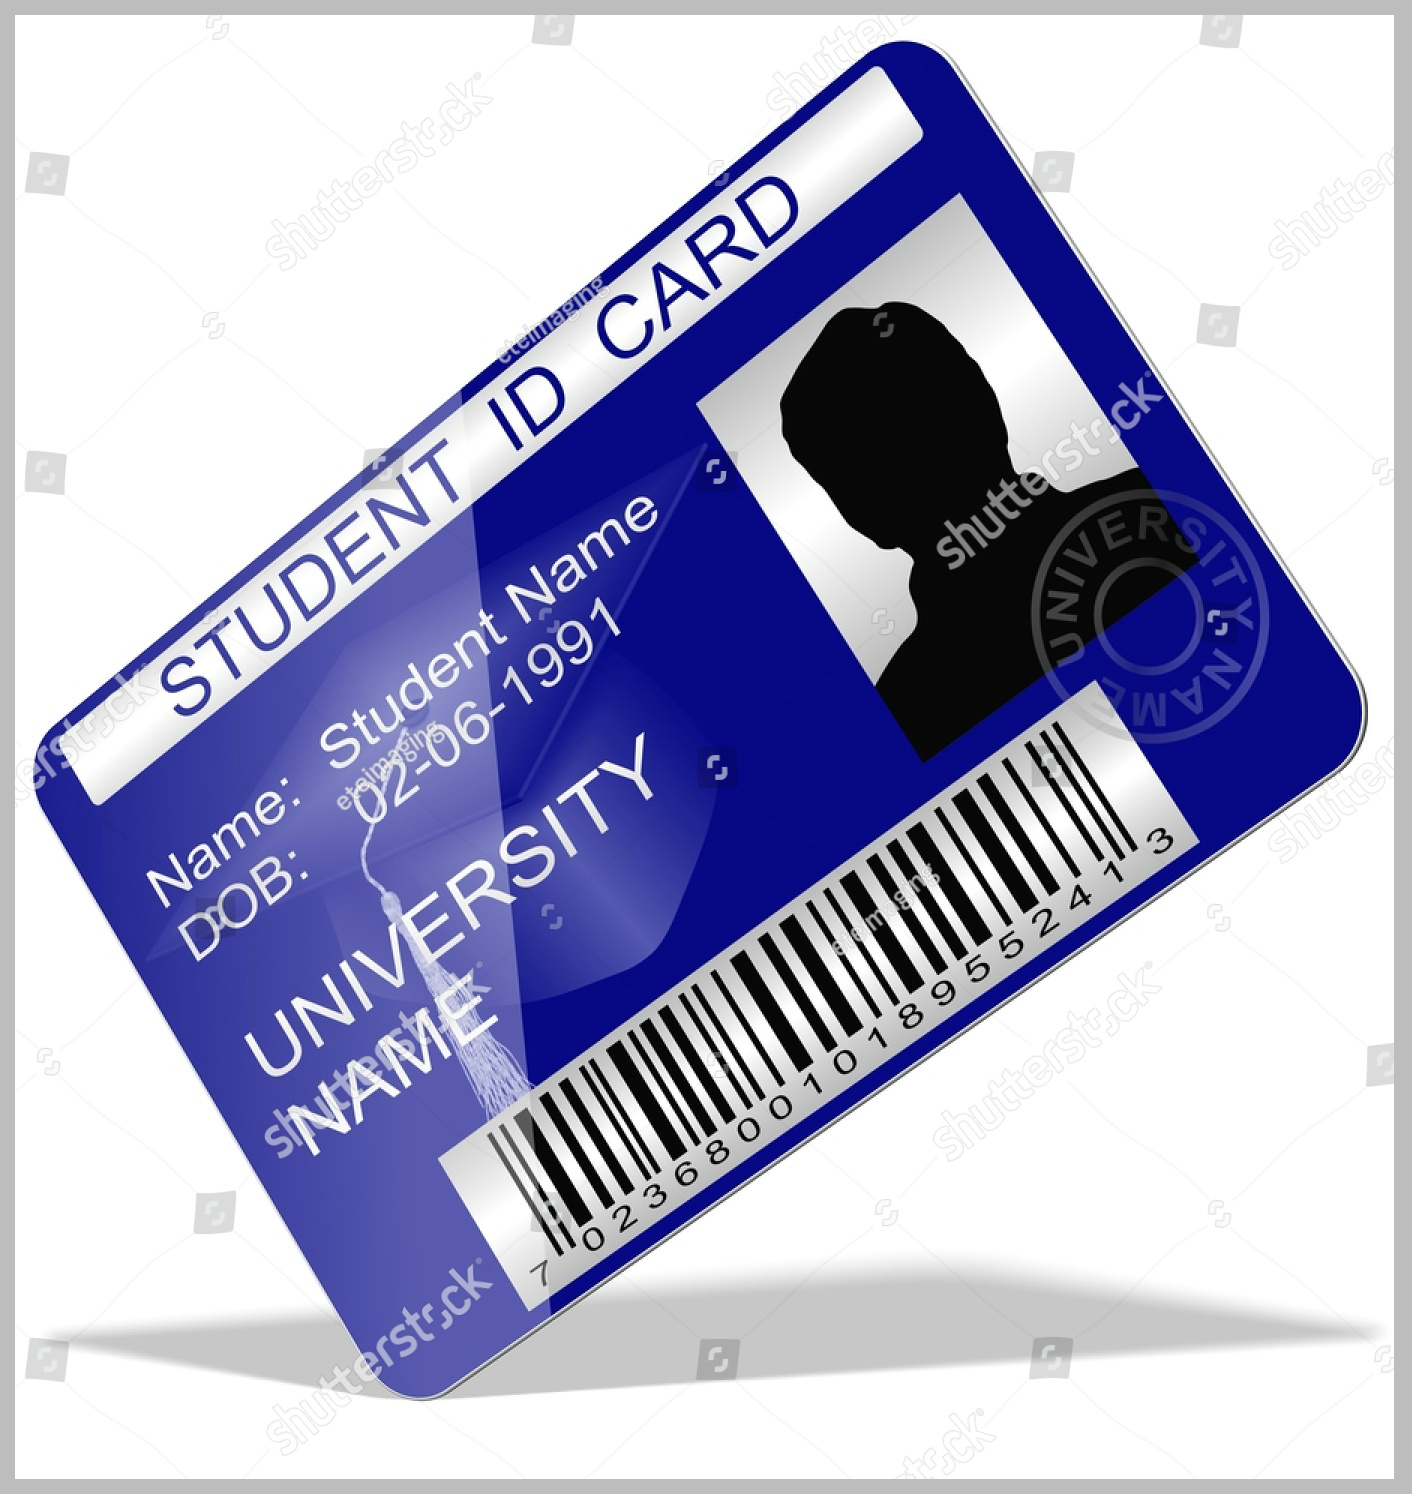 60-printable-student-id-card-template-html-maker-by-student-id-card